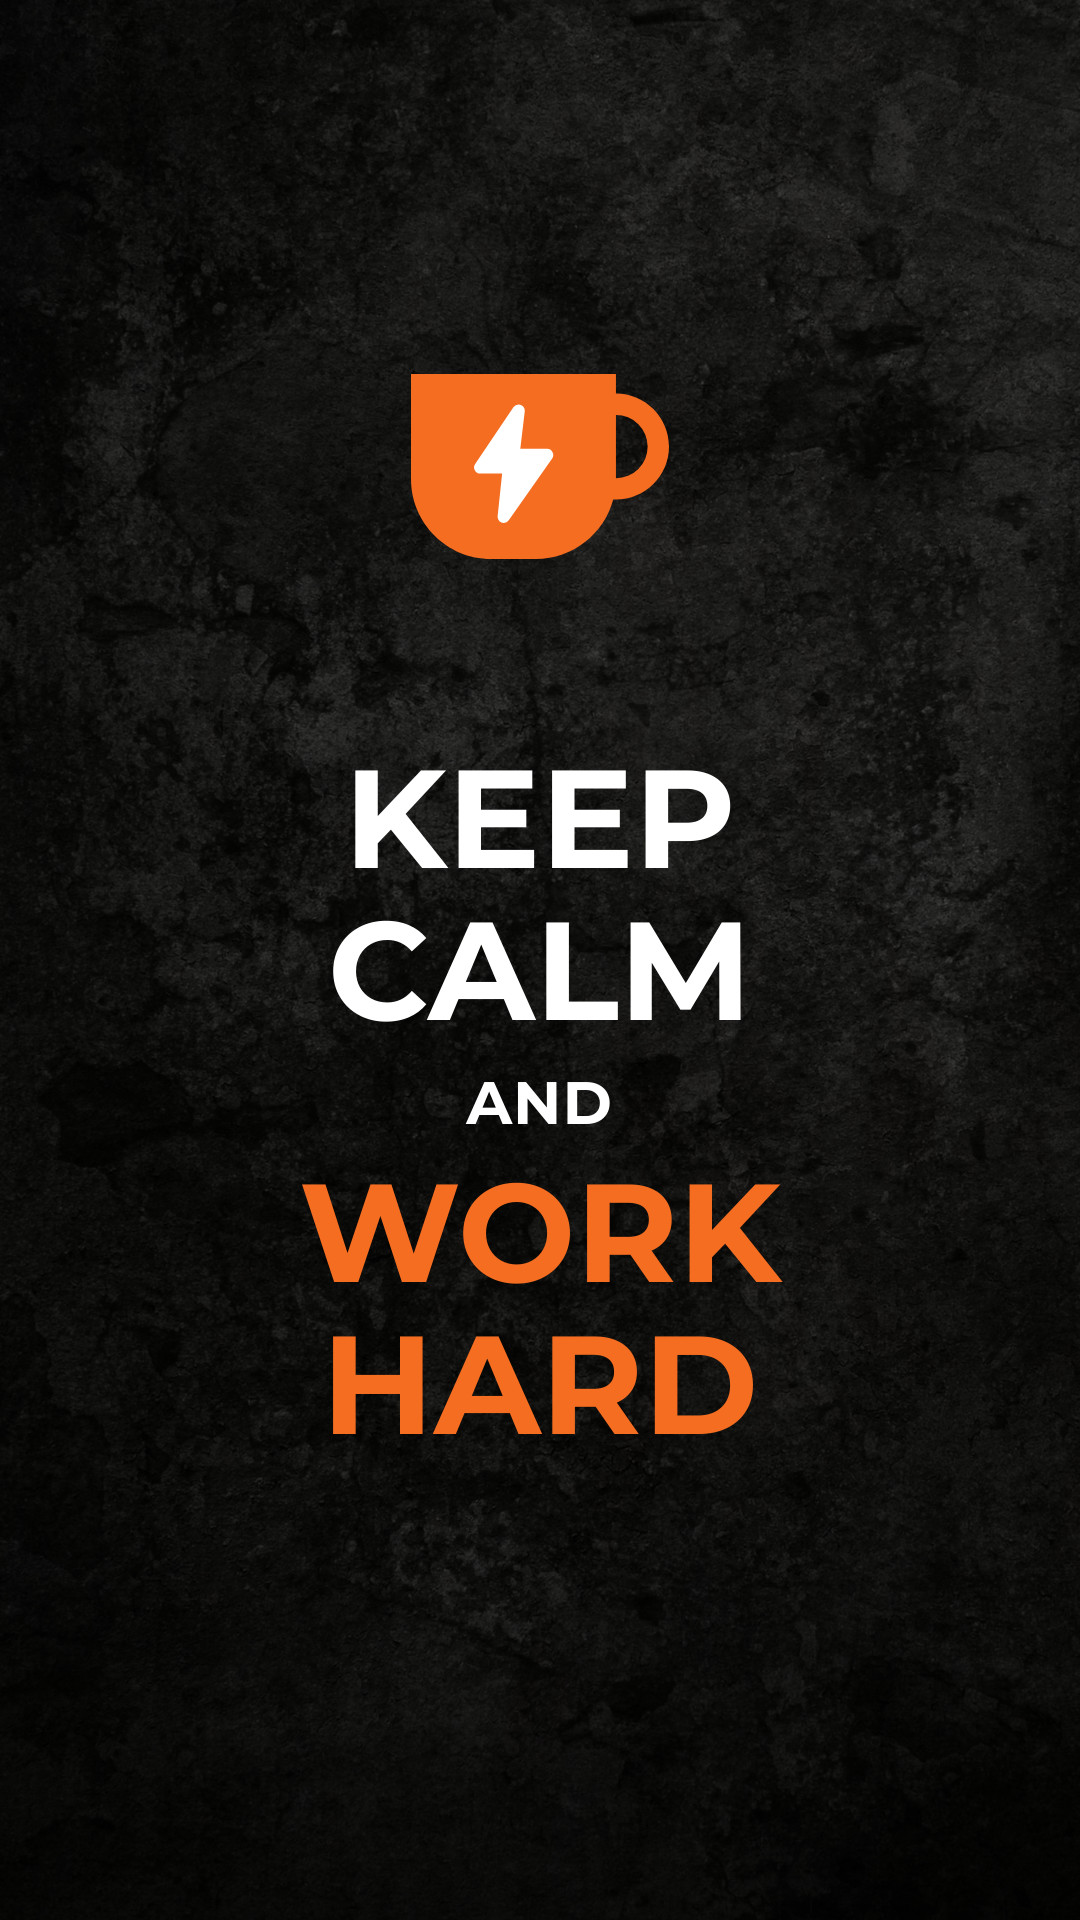 Keep Calm and Work Hard Facebook Sponsored Message 1200x628